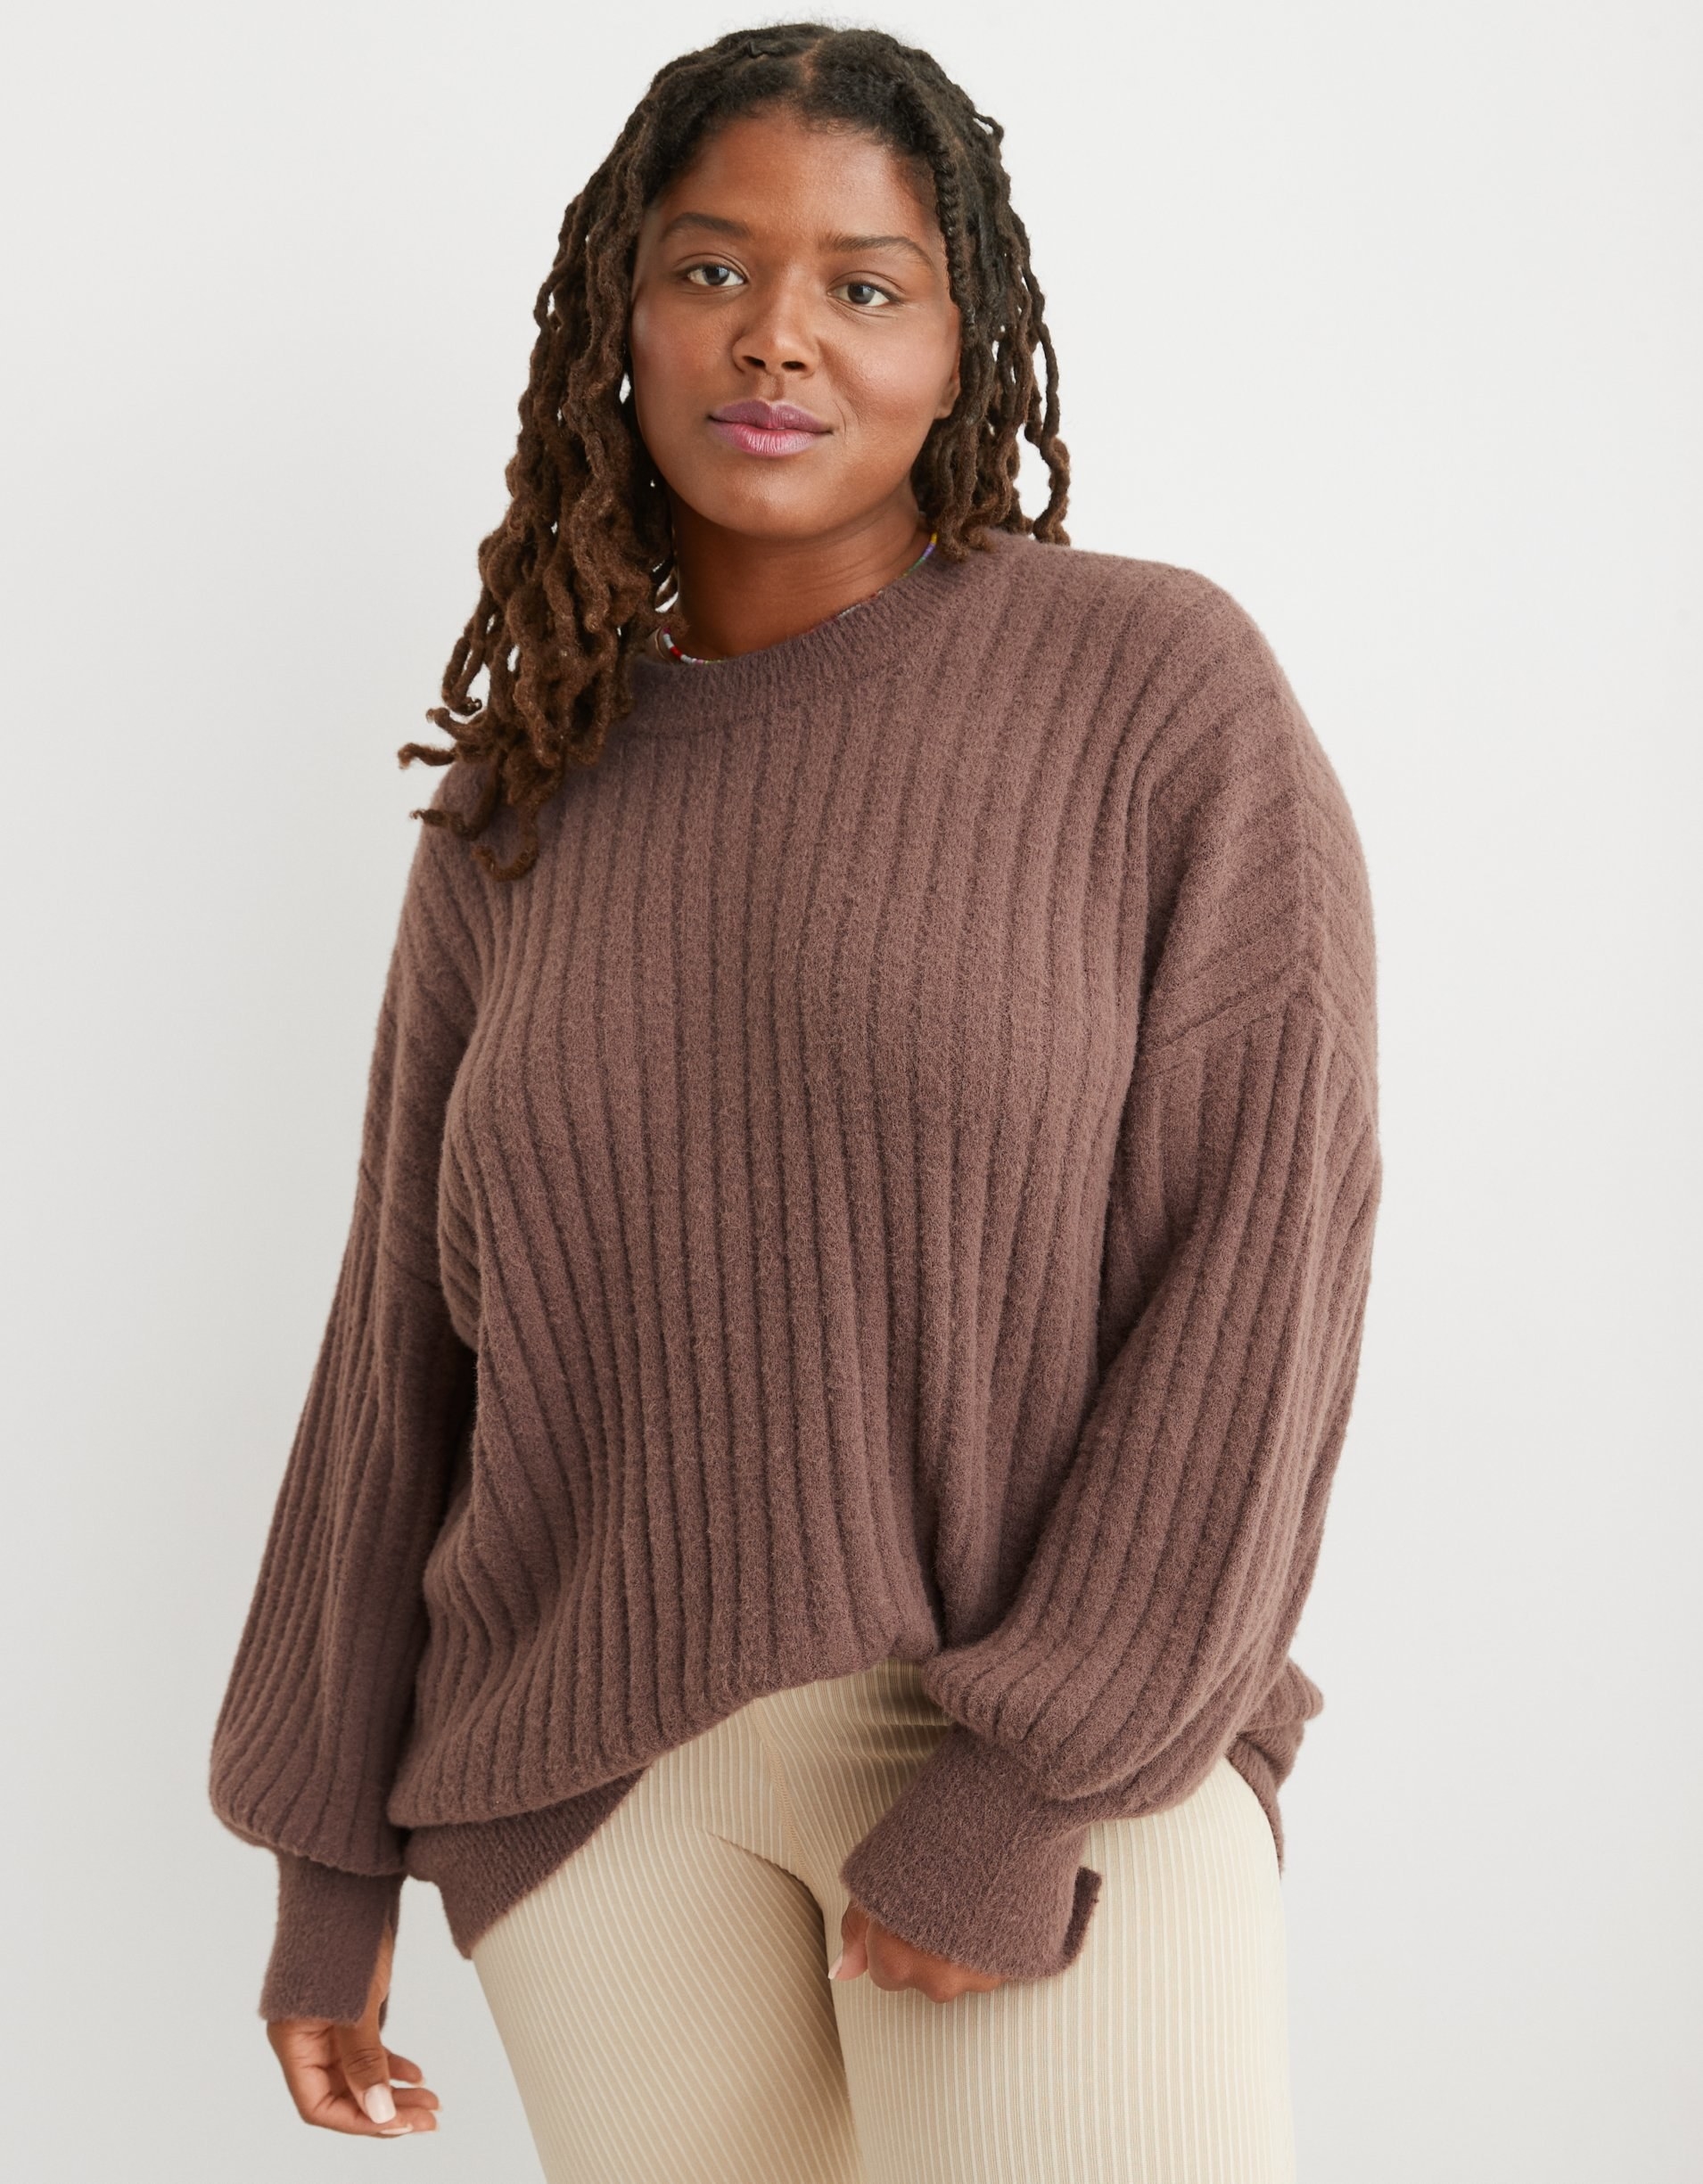 model in brown ribbed sweater with balloon sleeves